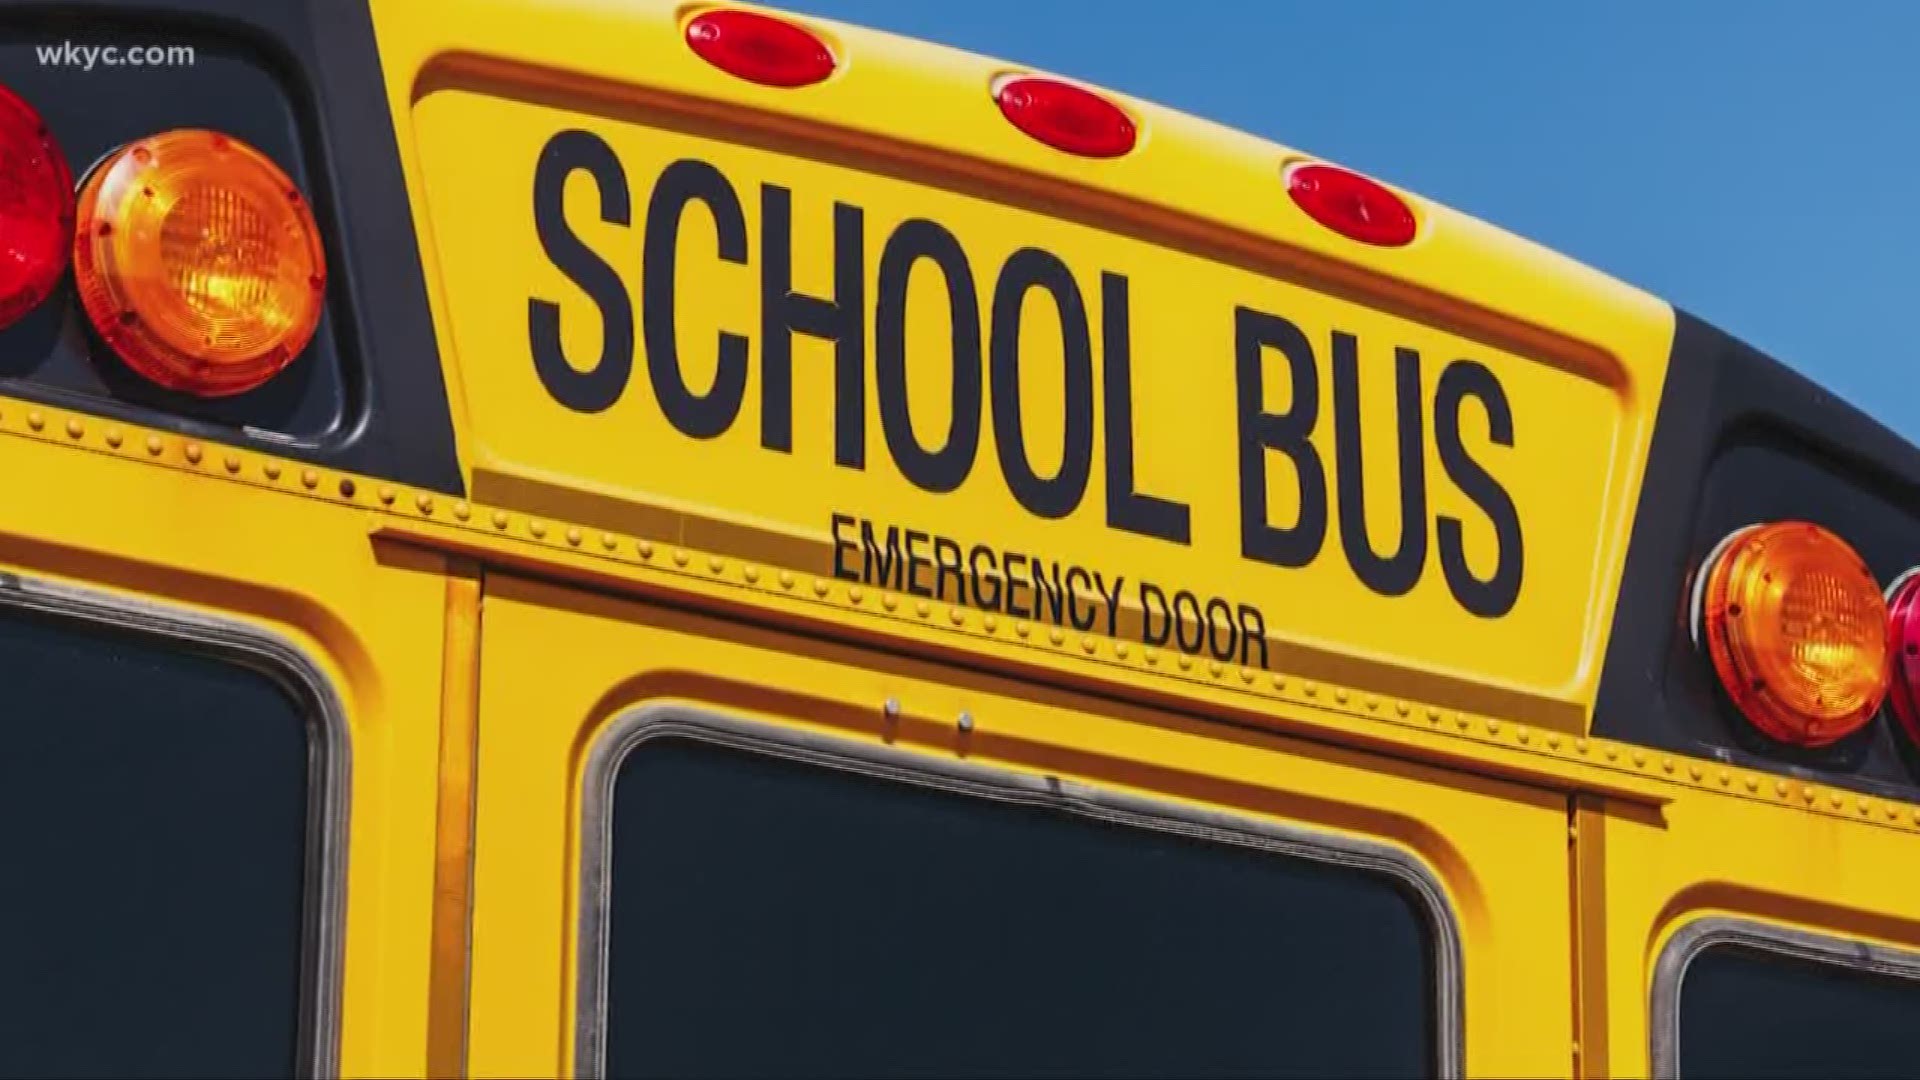 Aug. 22, 2019: It's something we all know... School buses are yellow. But have you ever wondered why? There is actually a reason behind the color.